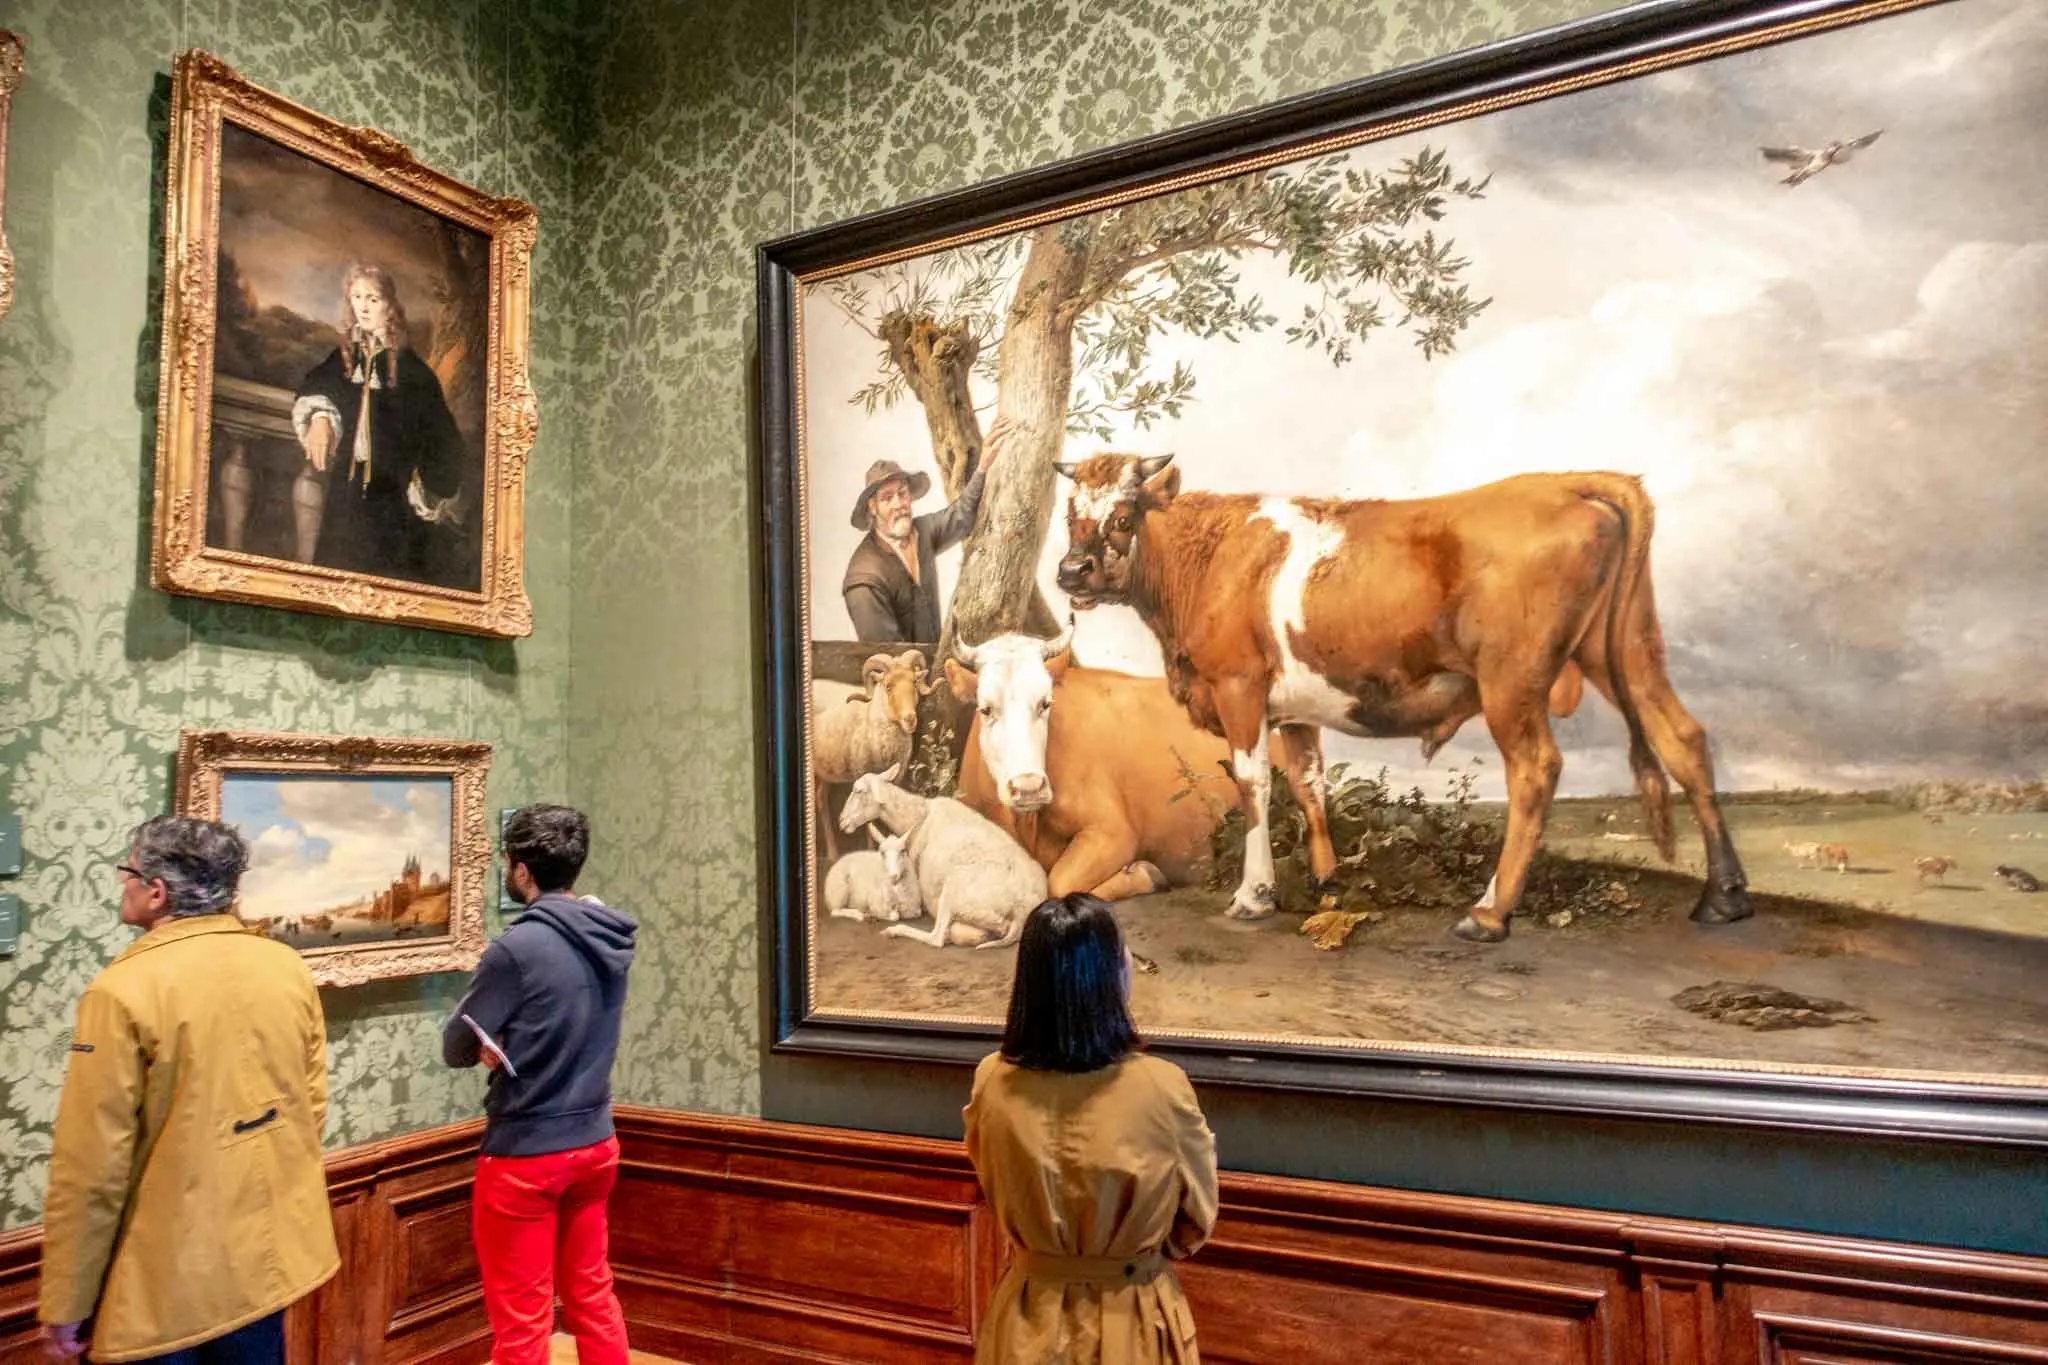 Visitors looking at paintings in a museum.